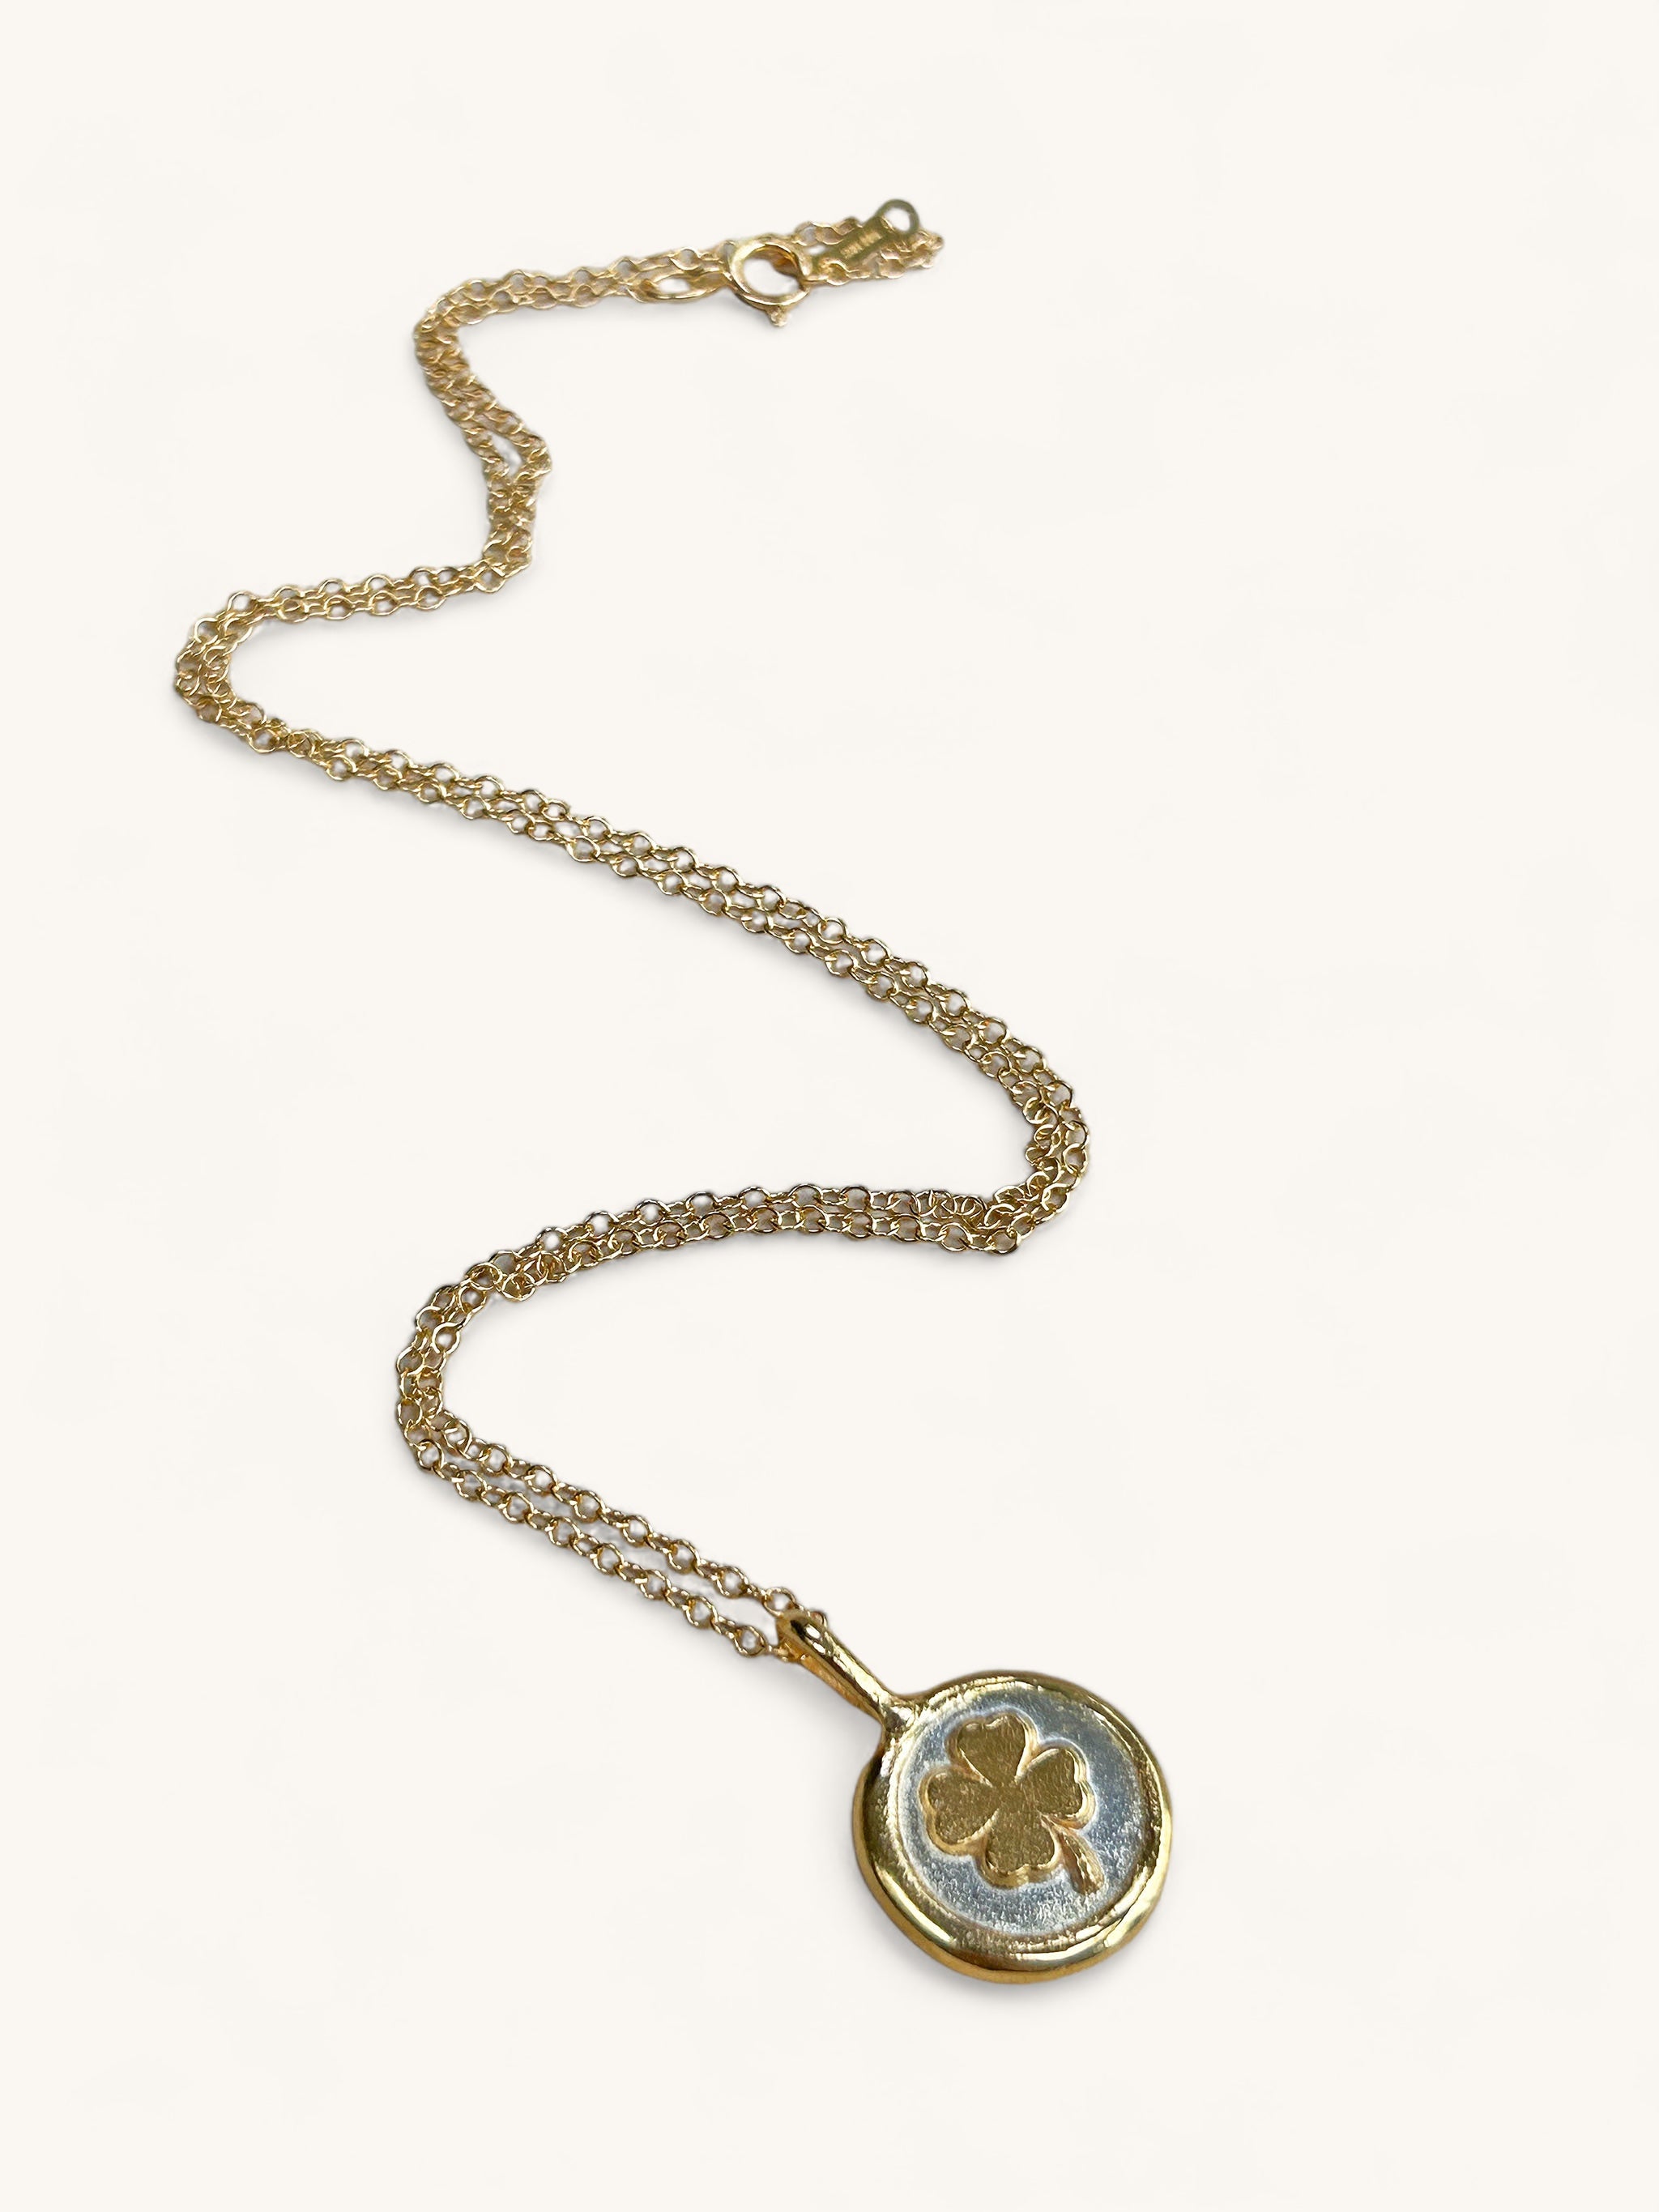 Jennifer Loiselle four leaf clover necklace in recycled silver and gold